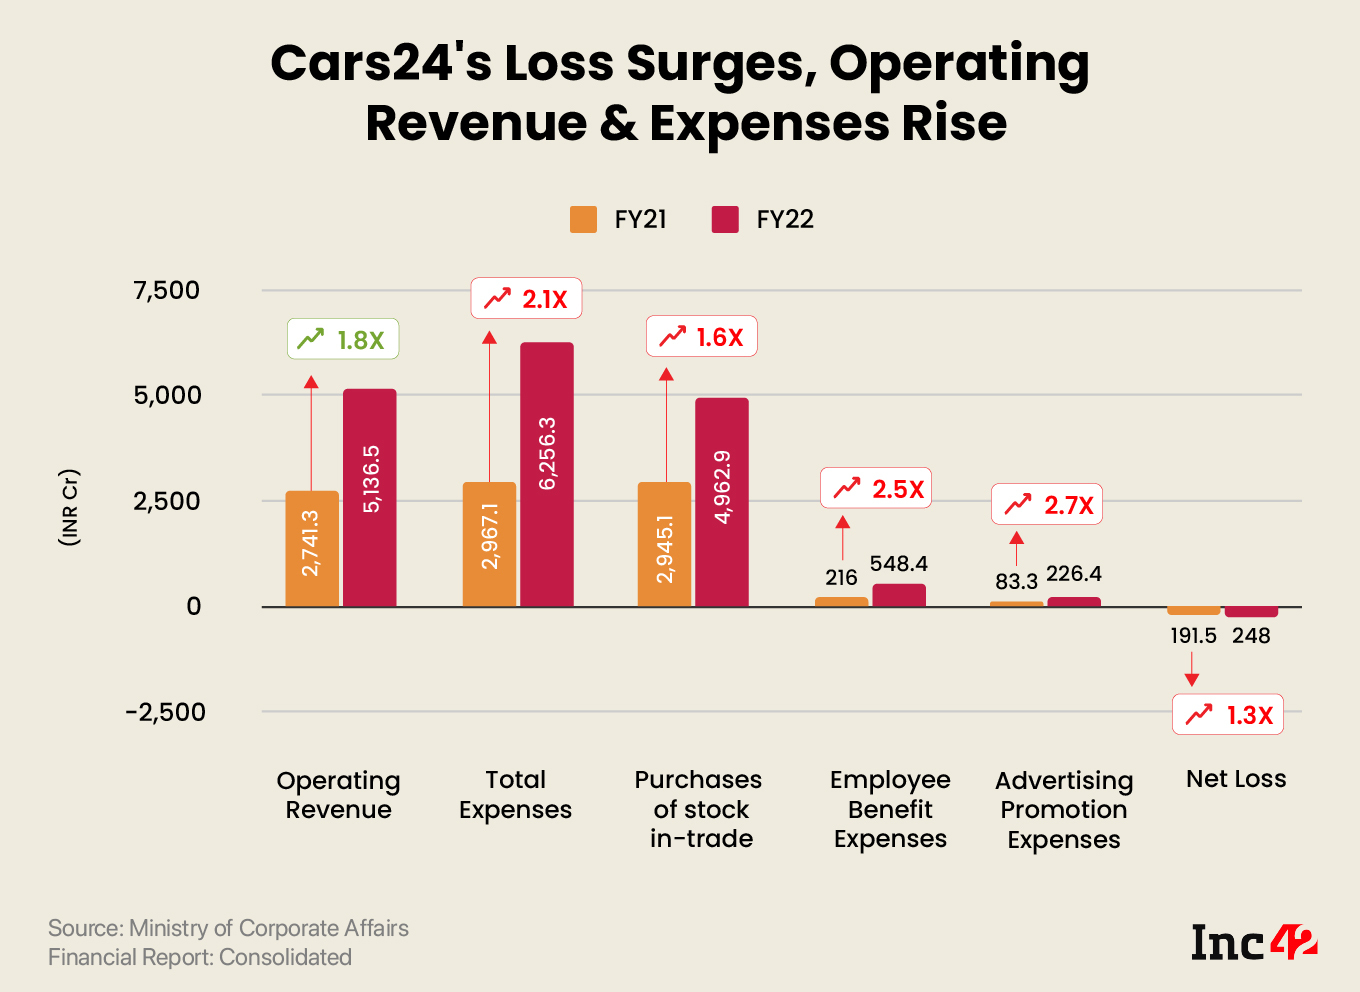 Cars24’s Total Revenue Doubles To INR 6,008 Cr In FY22, Loss Widens To INR 248 Cr